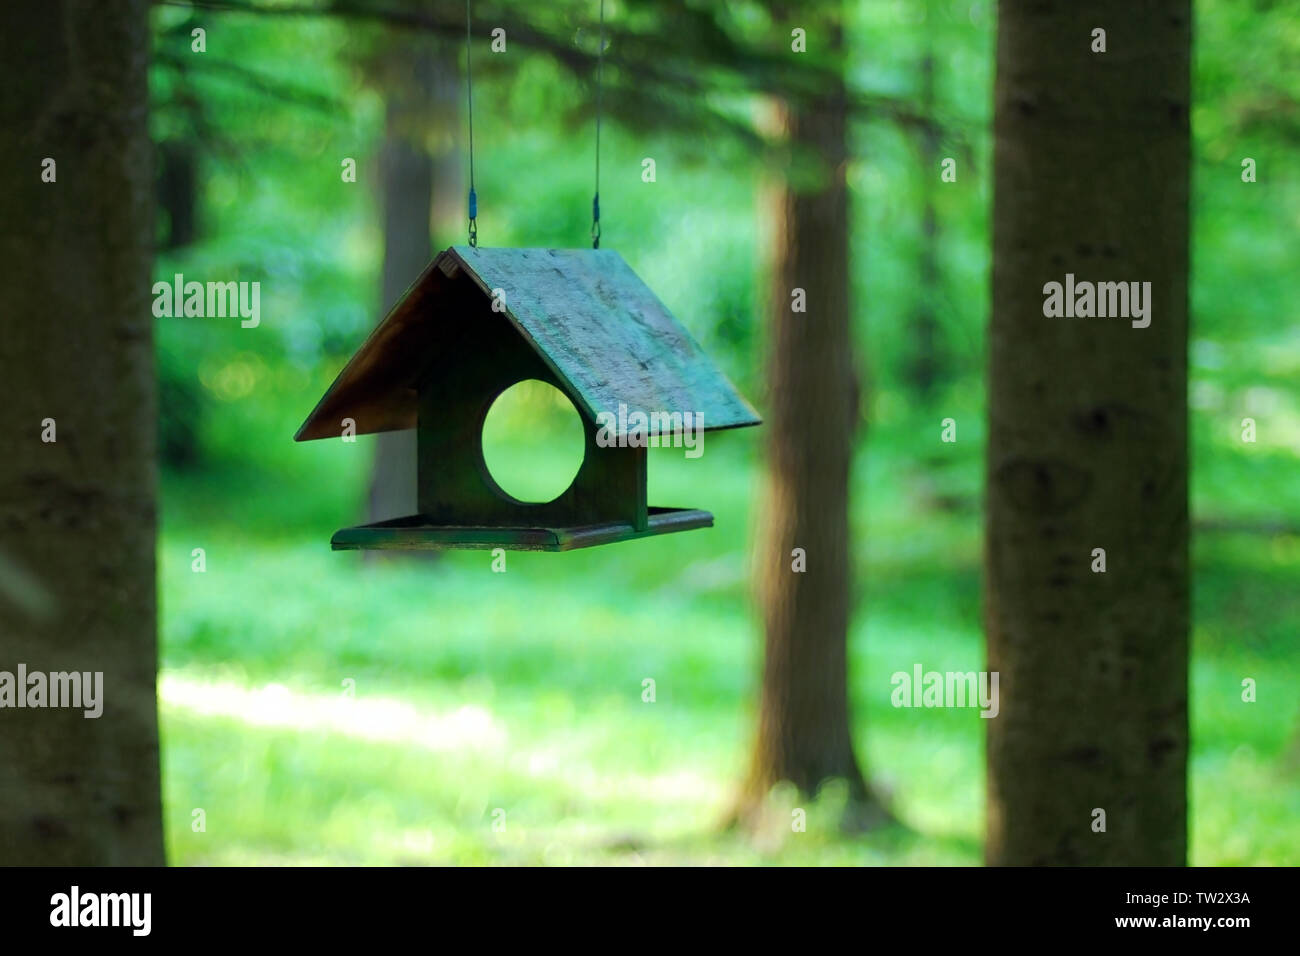 Green bird feeder hanging in shade of trees on blurred green summer forest background Stock Photo